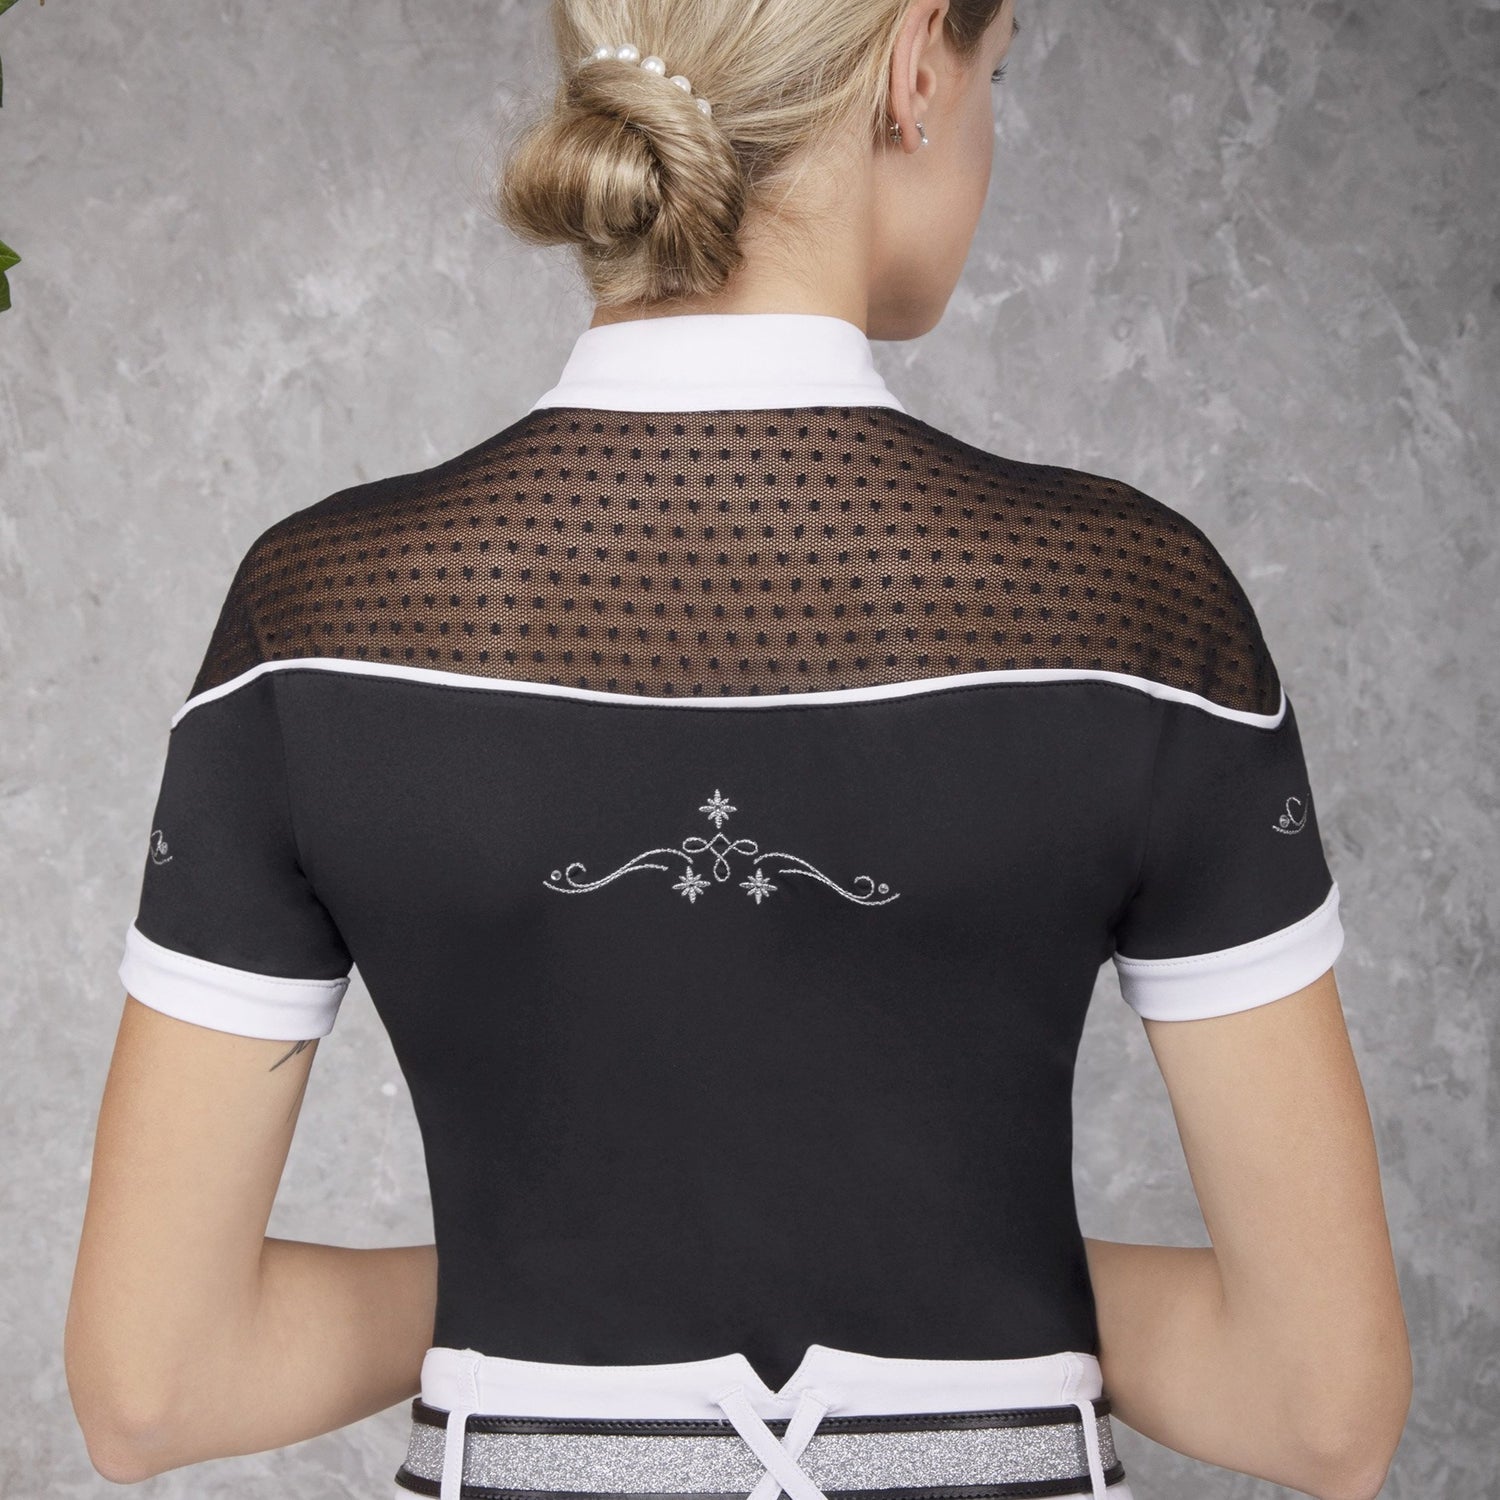 Ladies show shirt with mesh